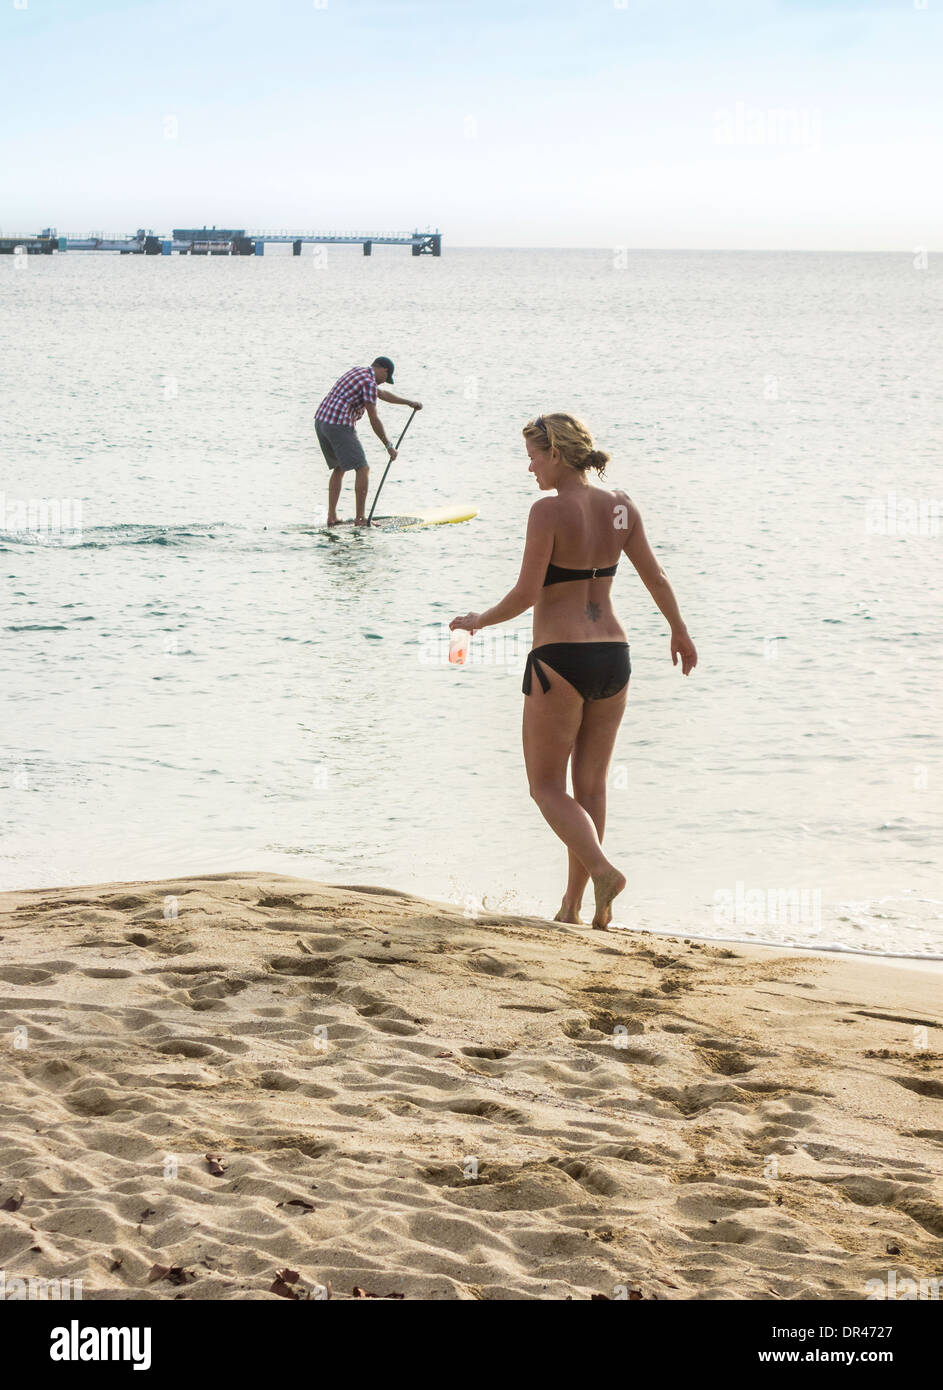 A Caucasian woman carries a drink along the beach while a man plays on a stand up paddle board in the Caribbean. St. Croix, U.S. Virgin Islands. Stock Photo